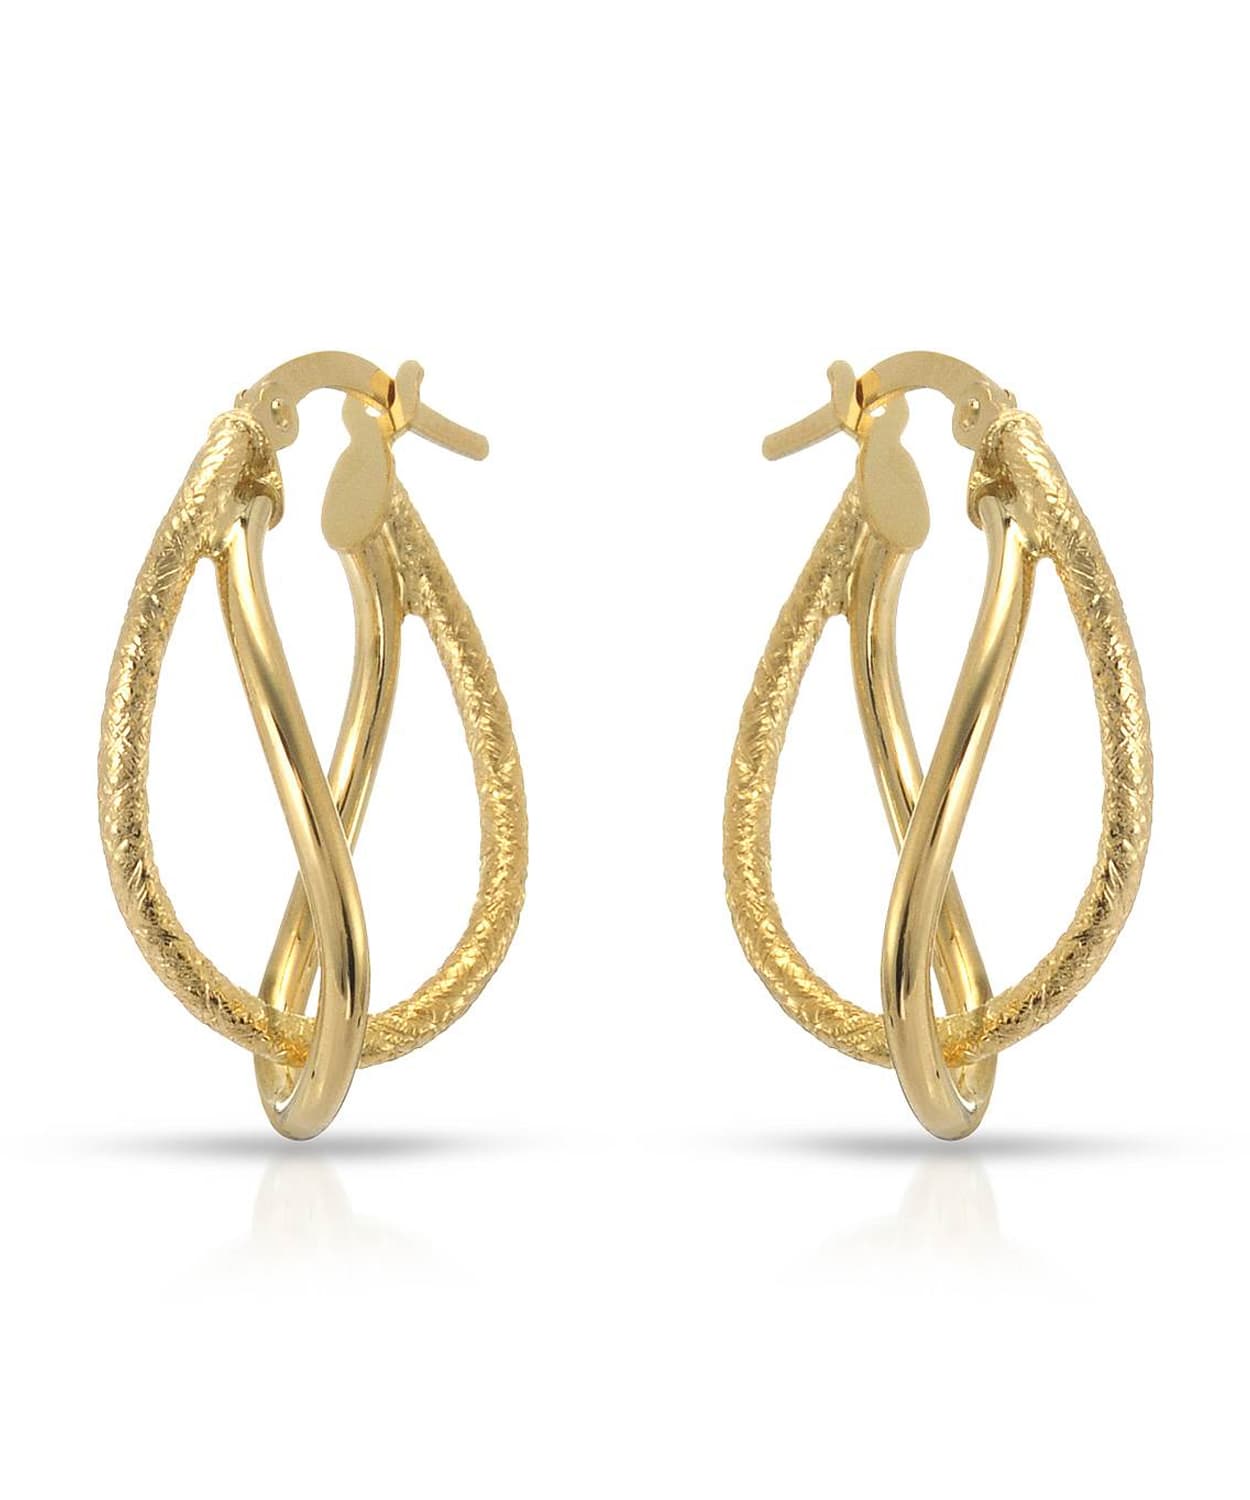 14k Yellow Gold Intertwined Earrings View 1